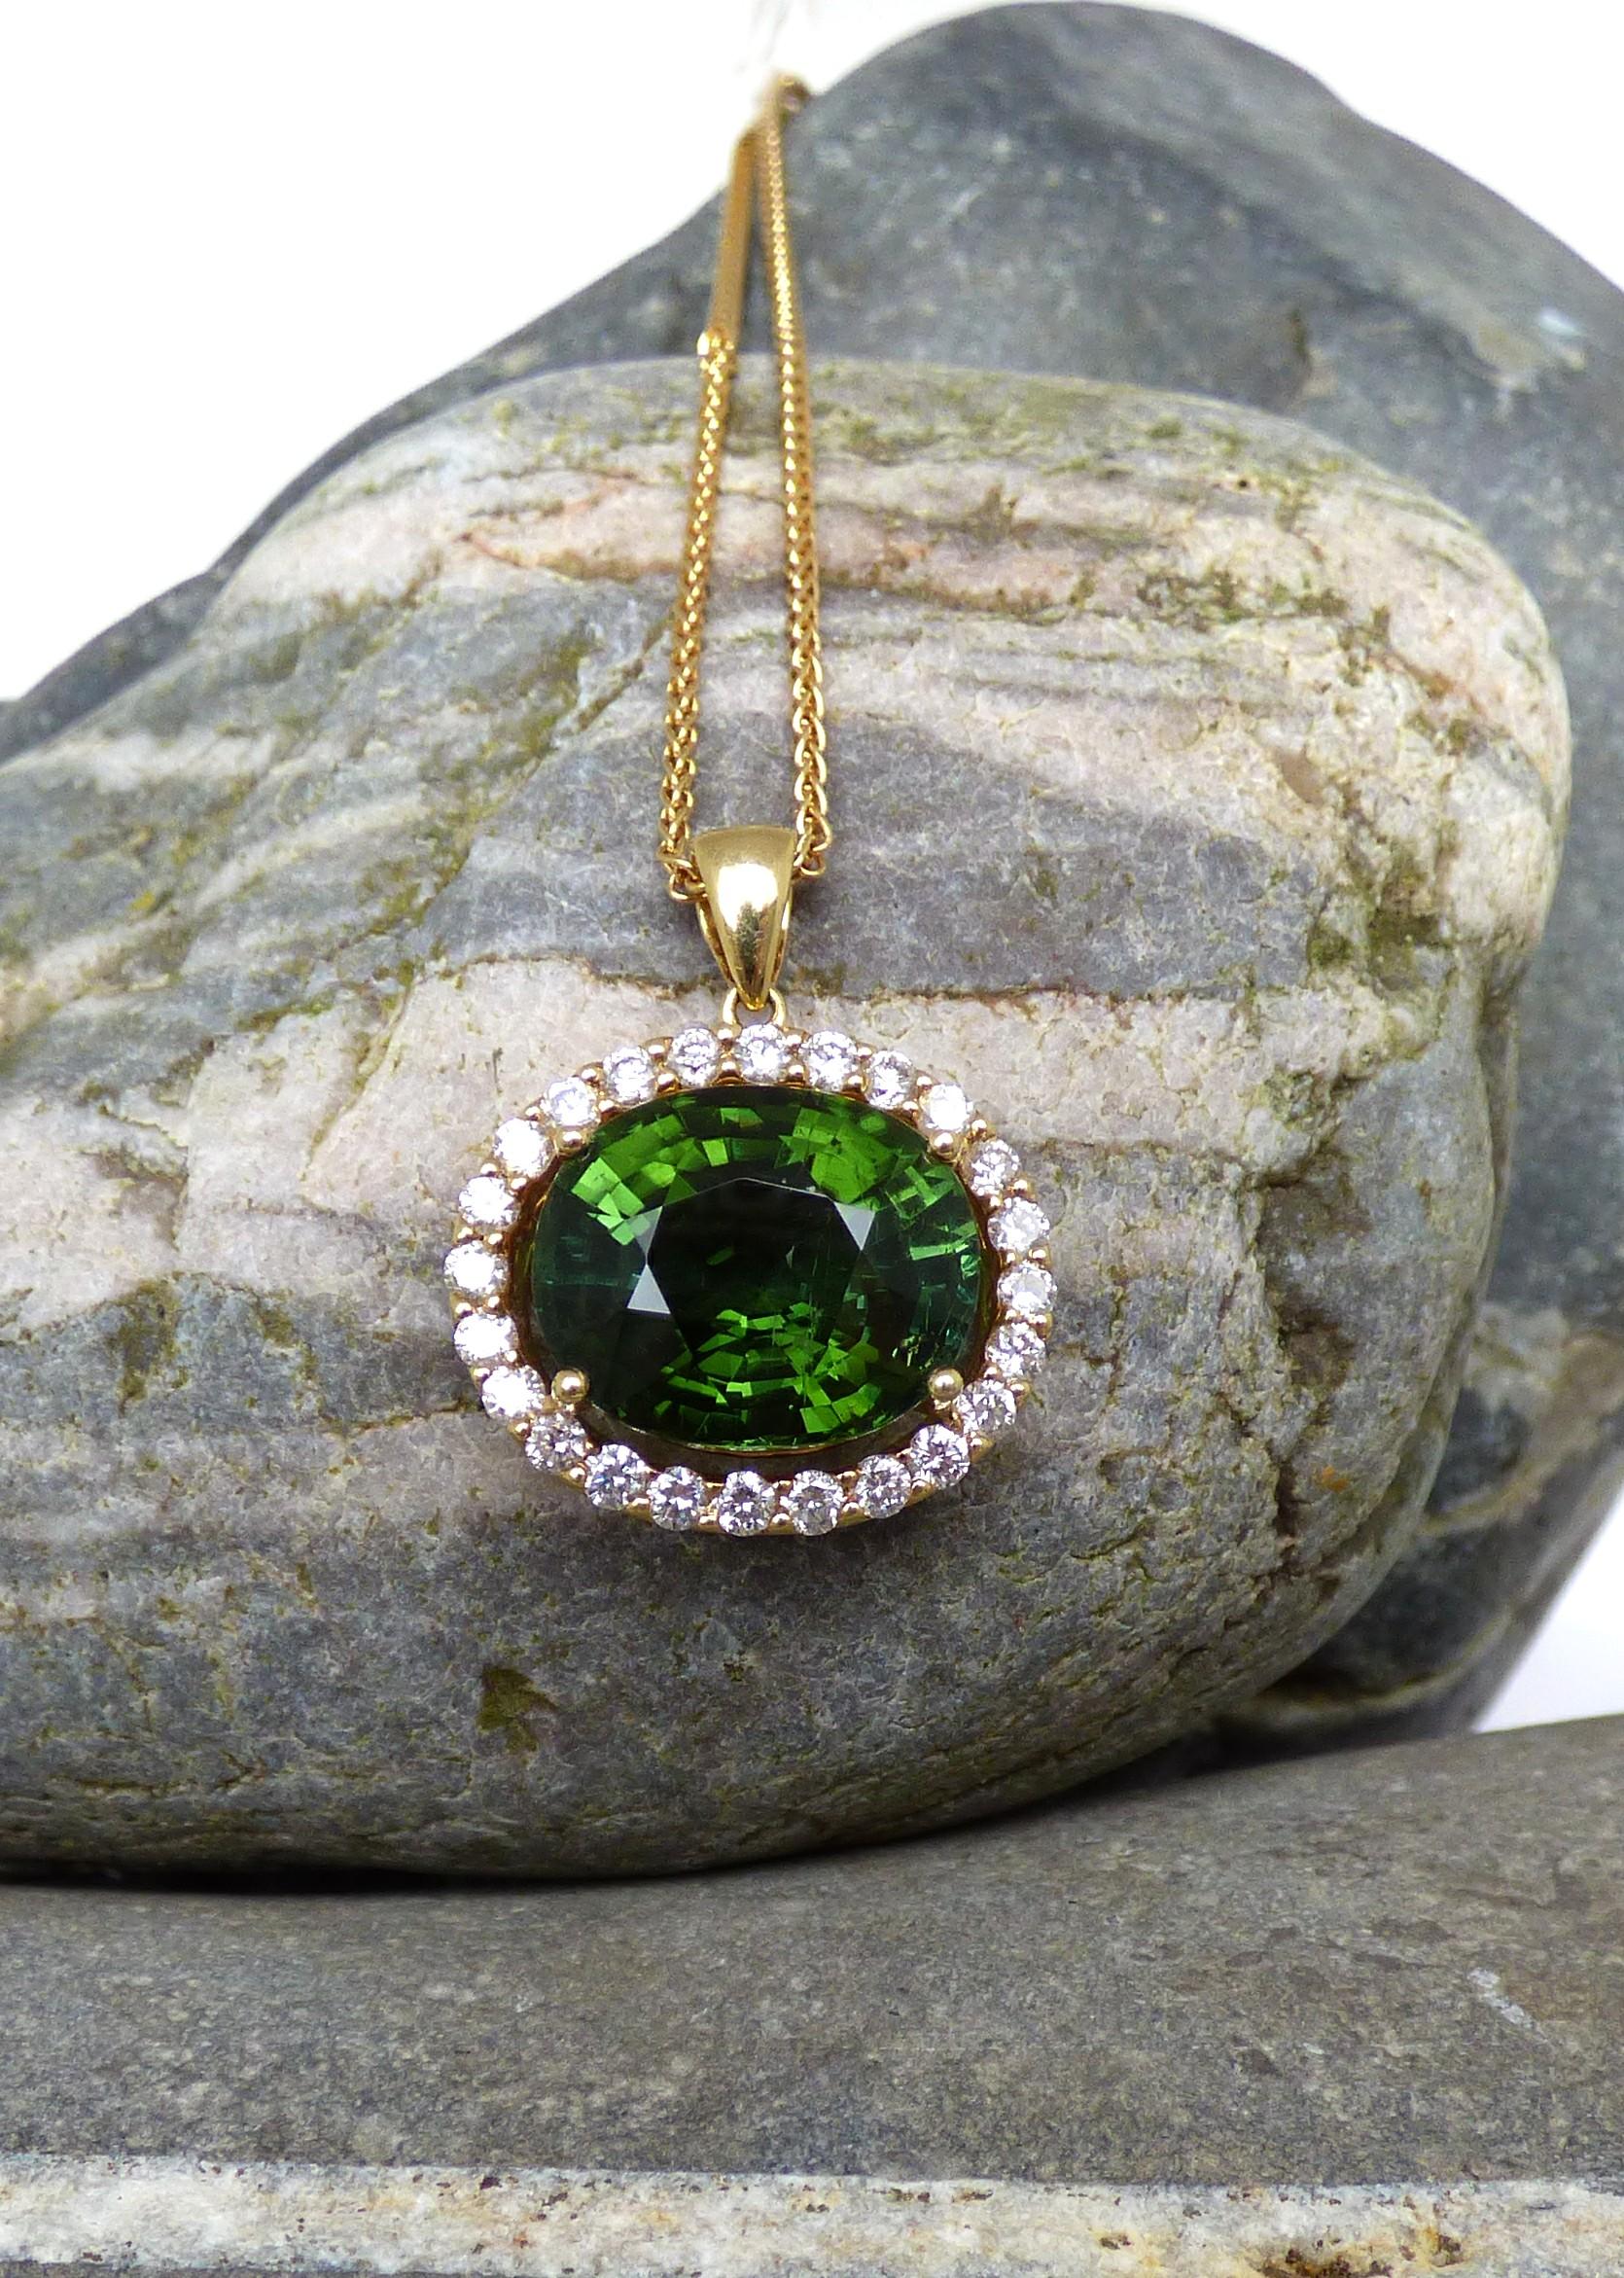 This bright colourful Green Tourmaline sets off this pendant.  The Tourmaline is oval weighs 9.48ct.  It is surrounded by 24 Diamonds with a total Diamond weight of .92ct. This piece is handmade in 18K yellow gold and hallmarked by the Dublin Assay